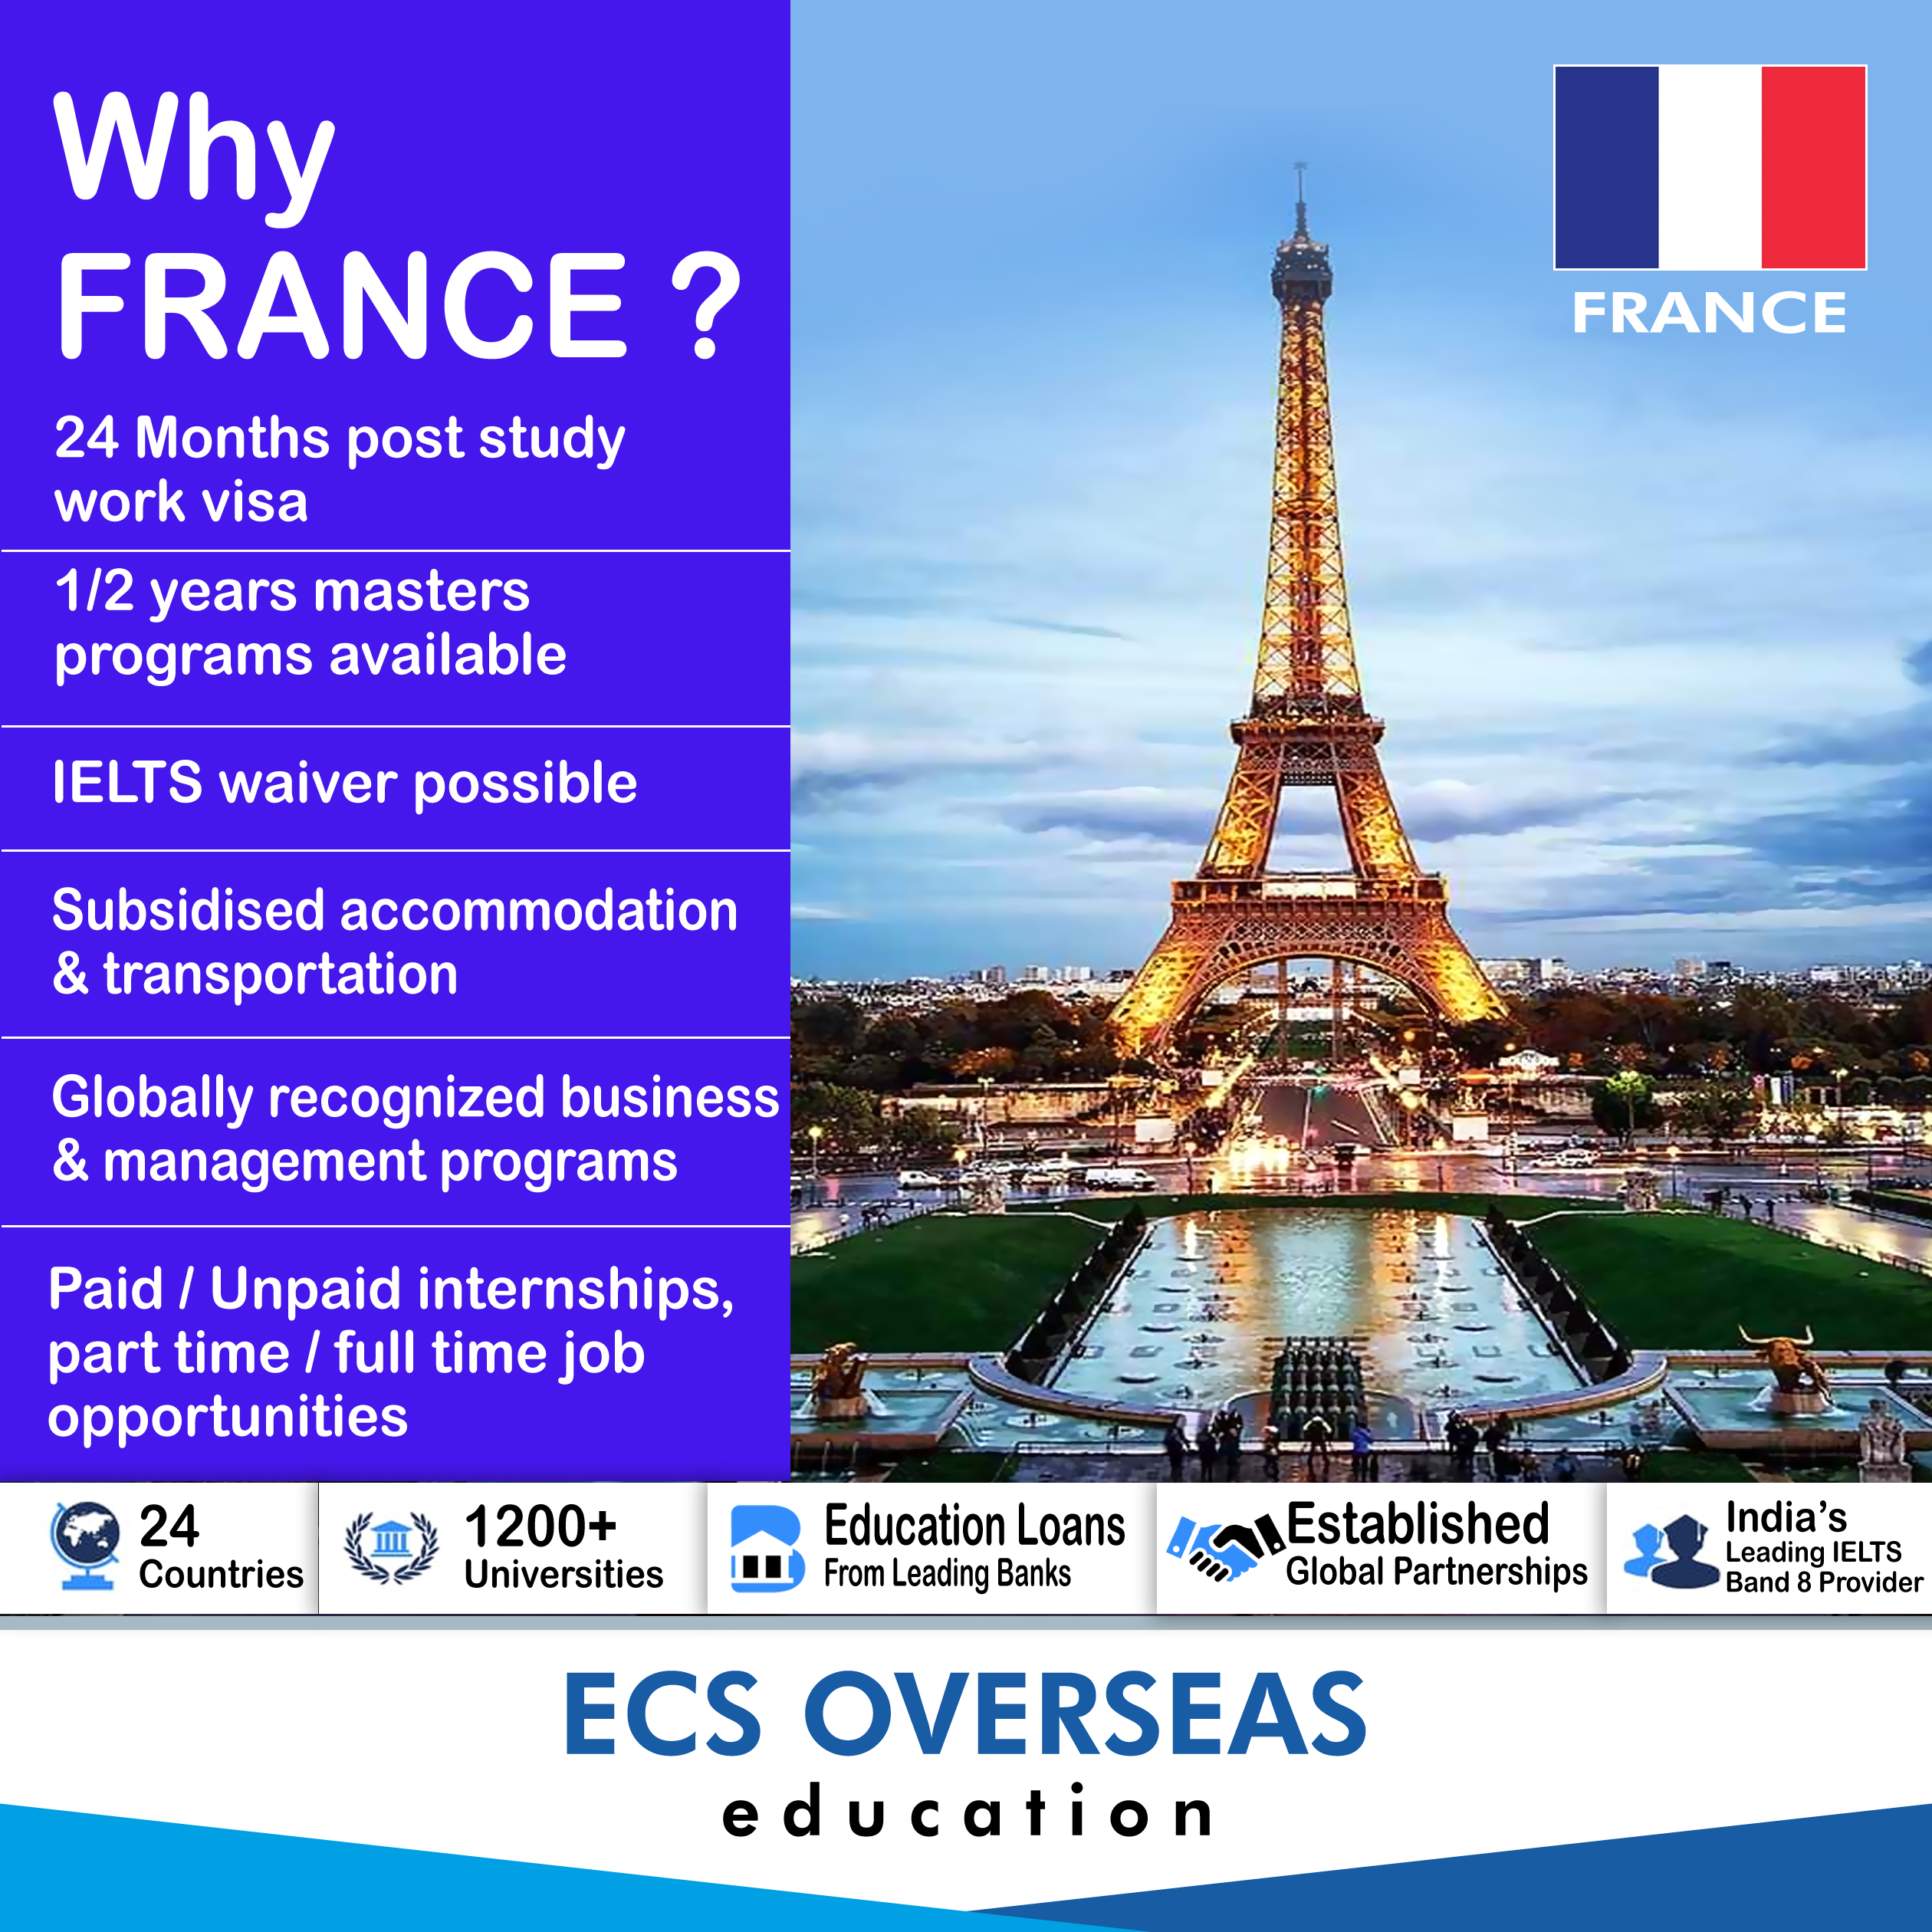 Overseas education consultants for France